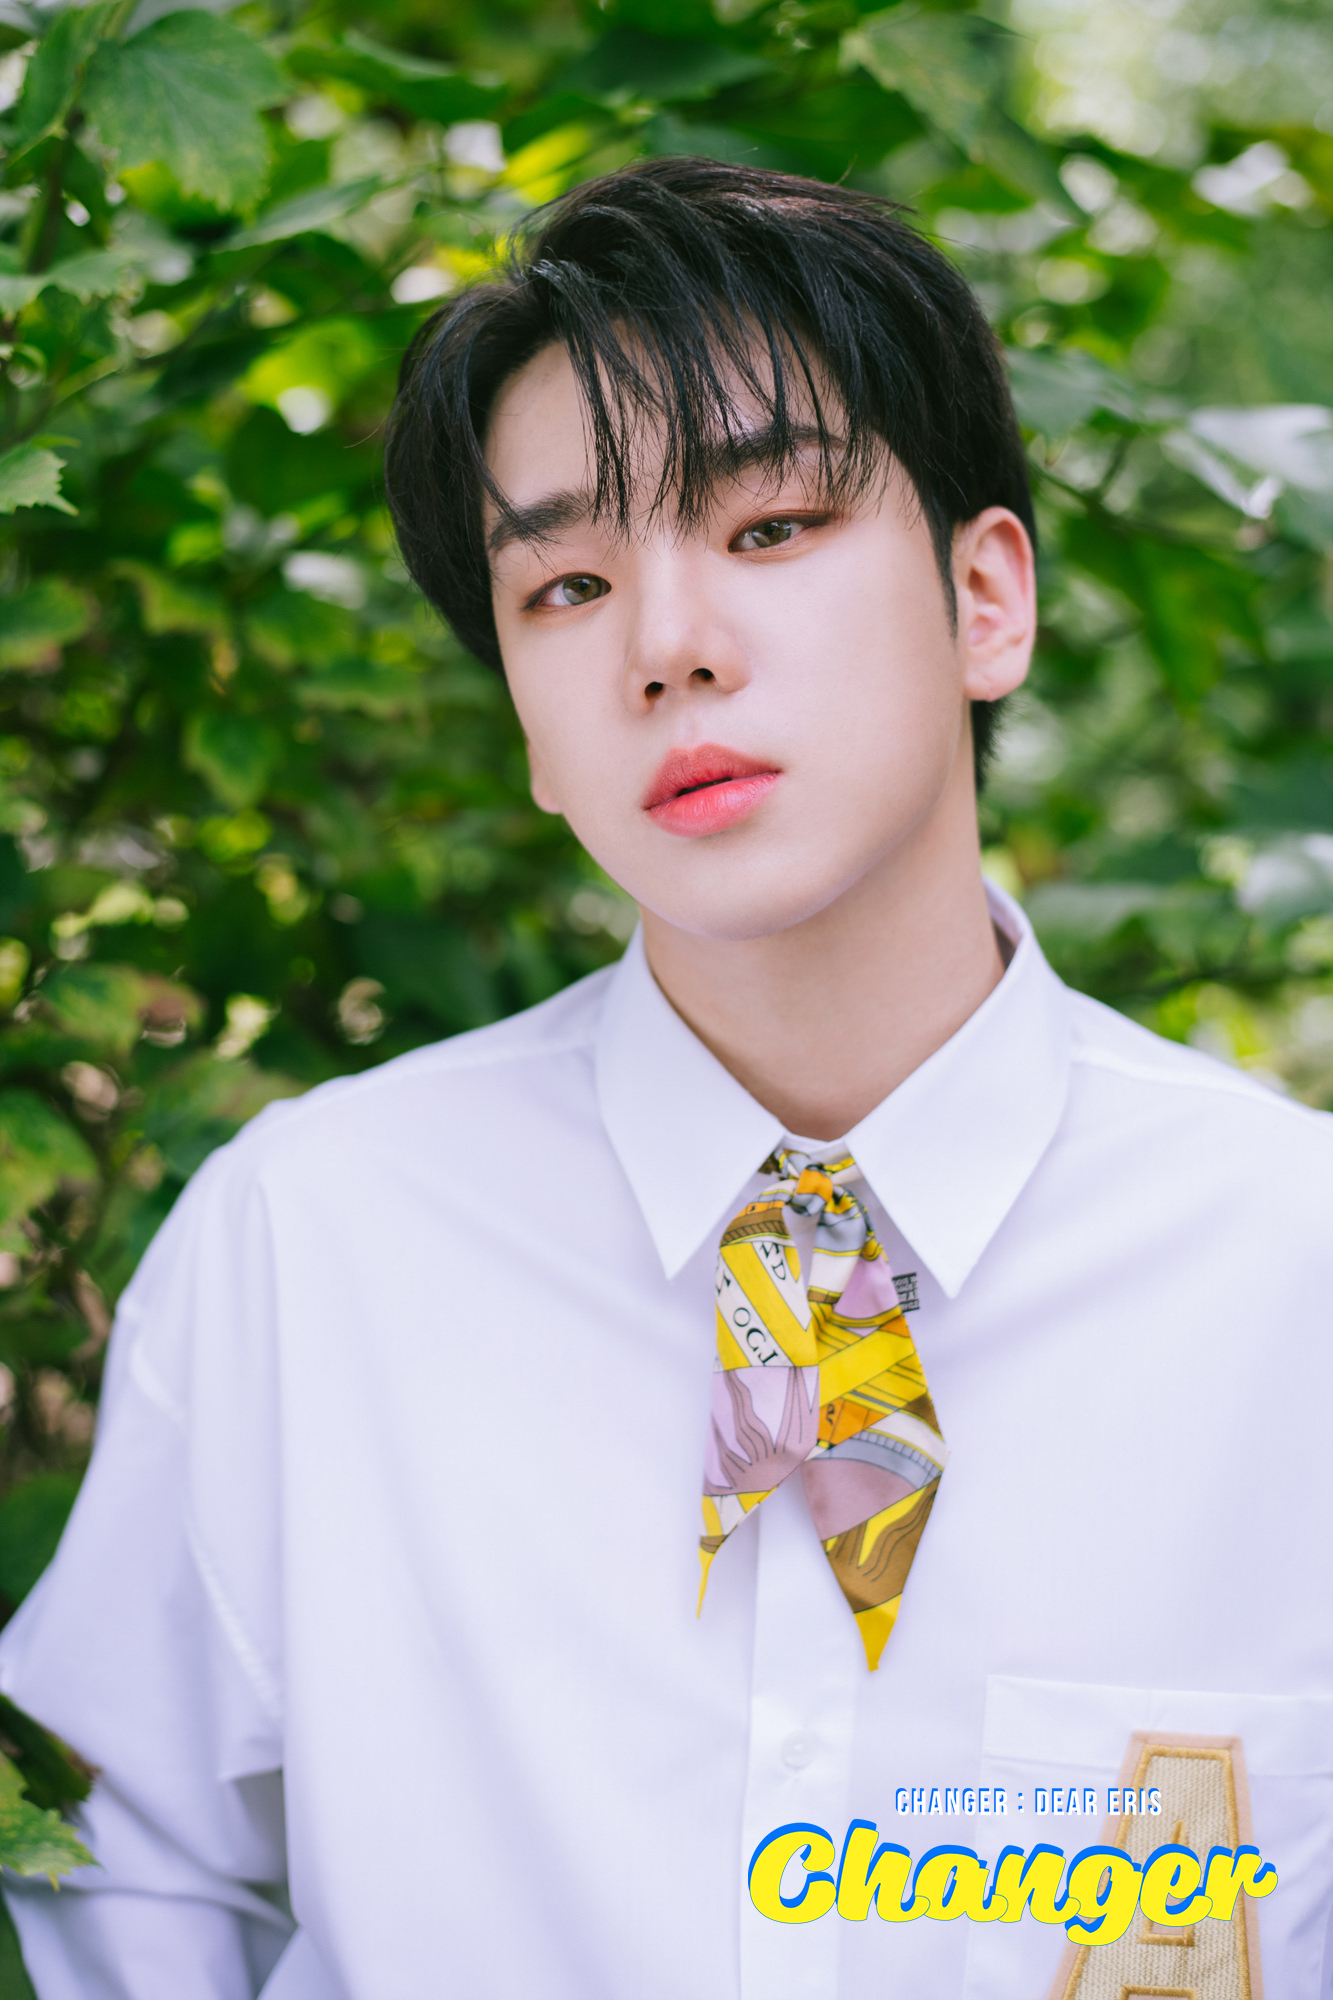 A.C.E Members Profile and Facts (Updated!)